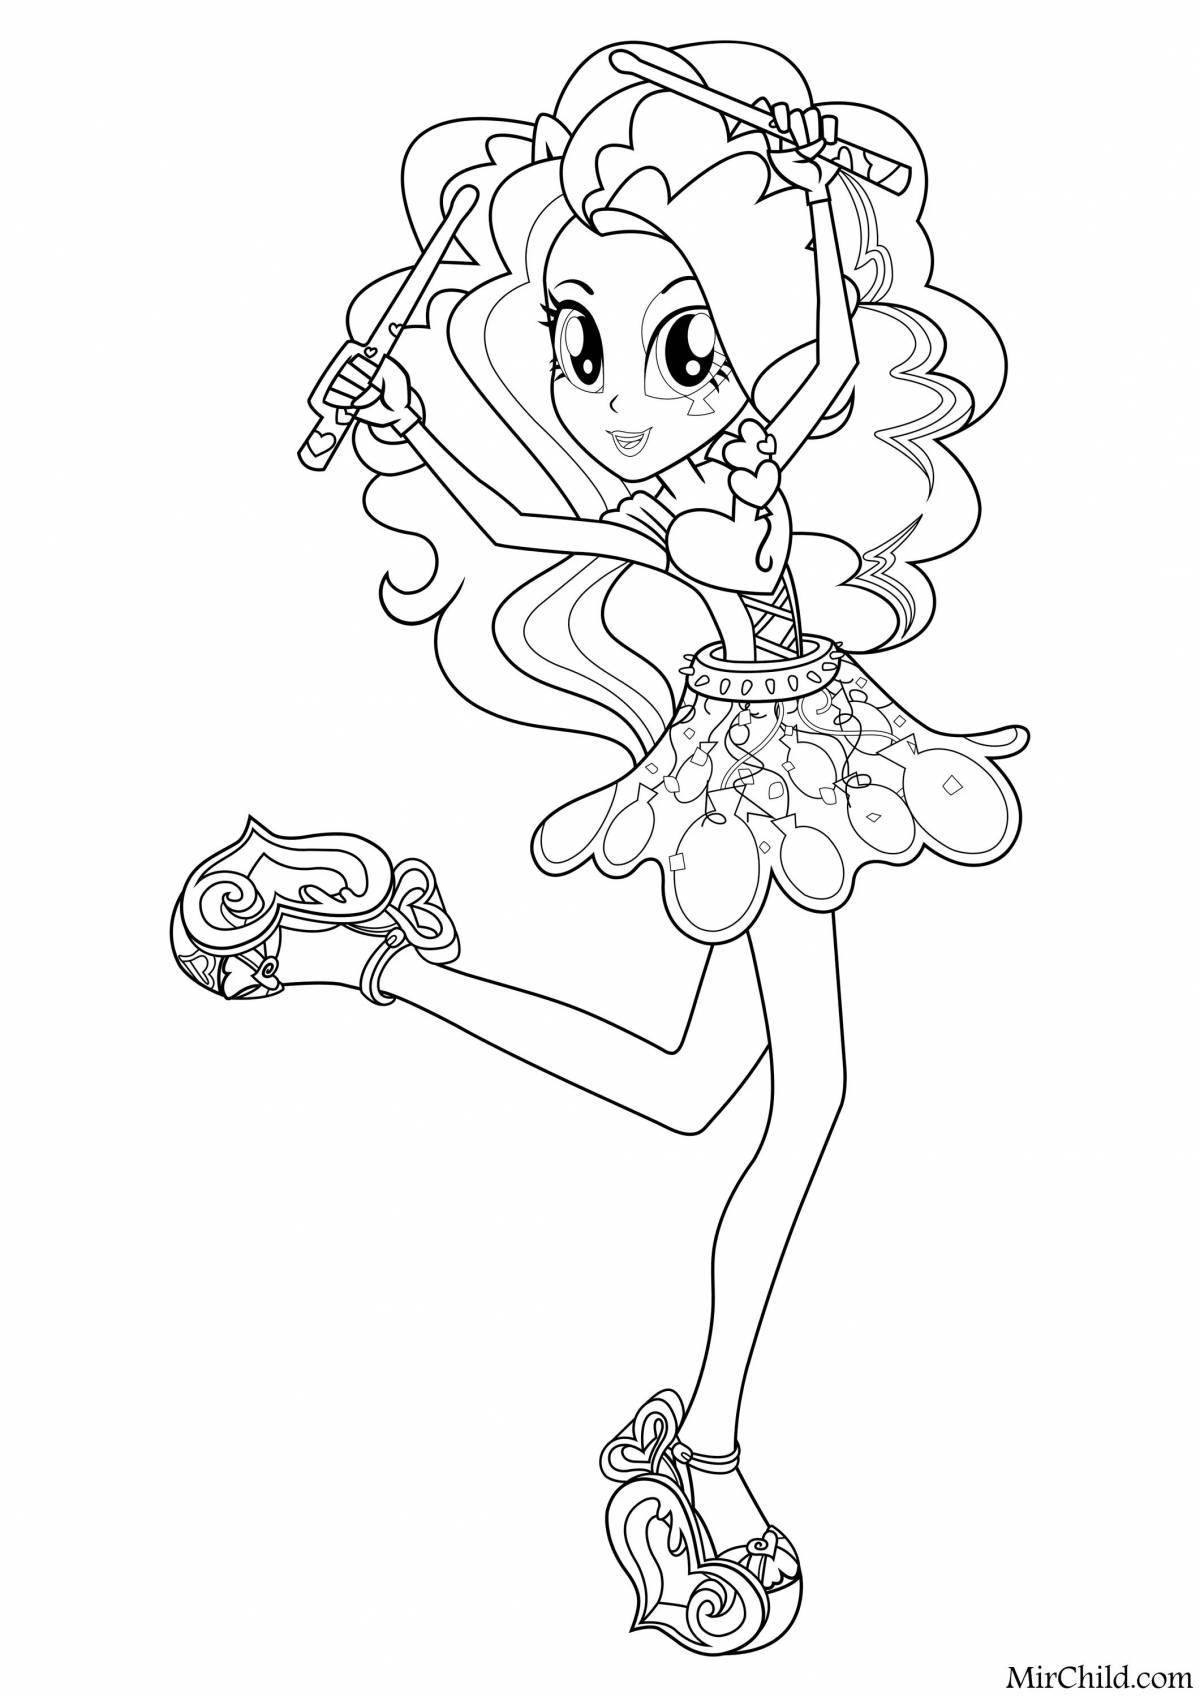 Happy pinkie pie coloring page